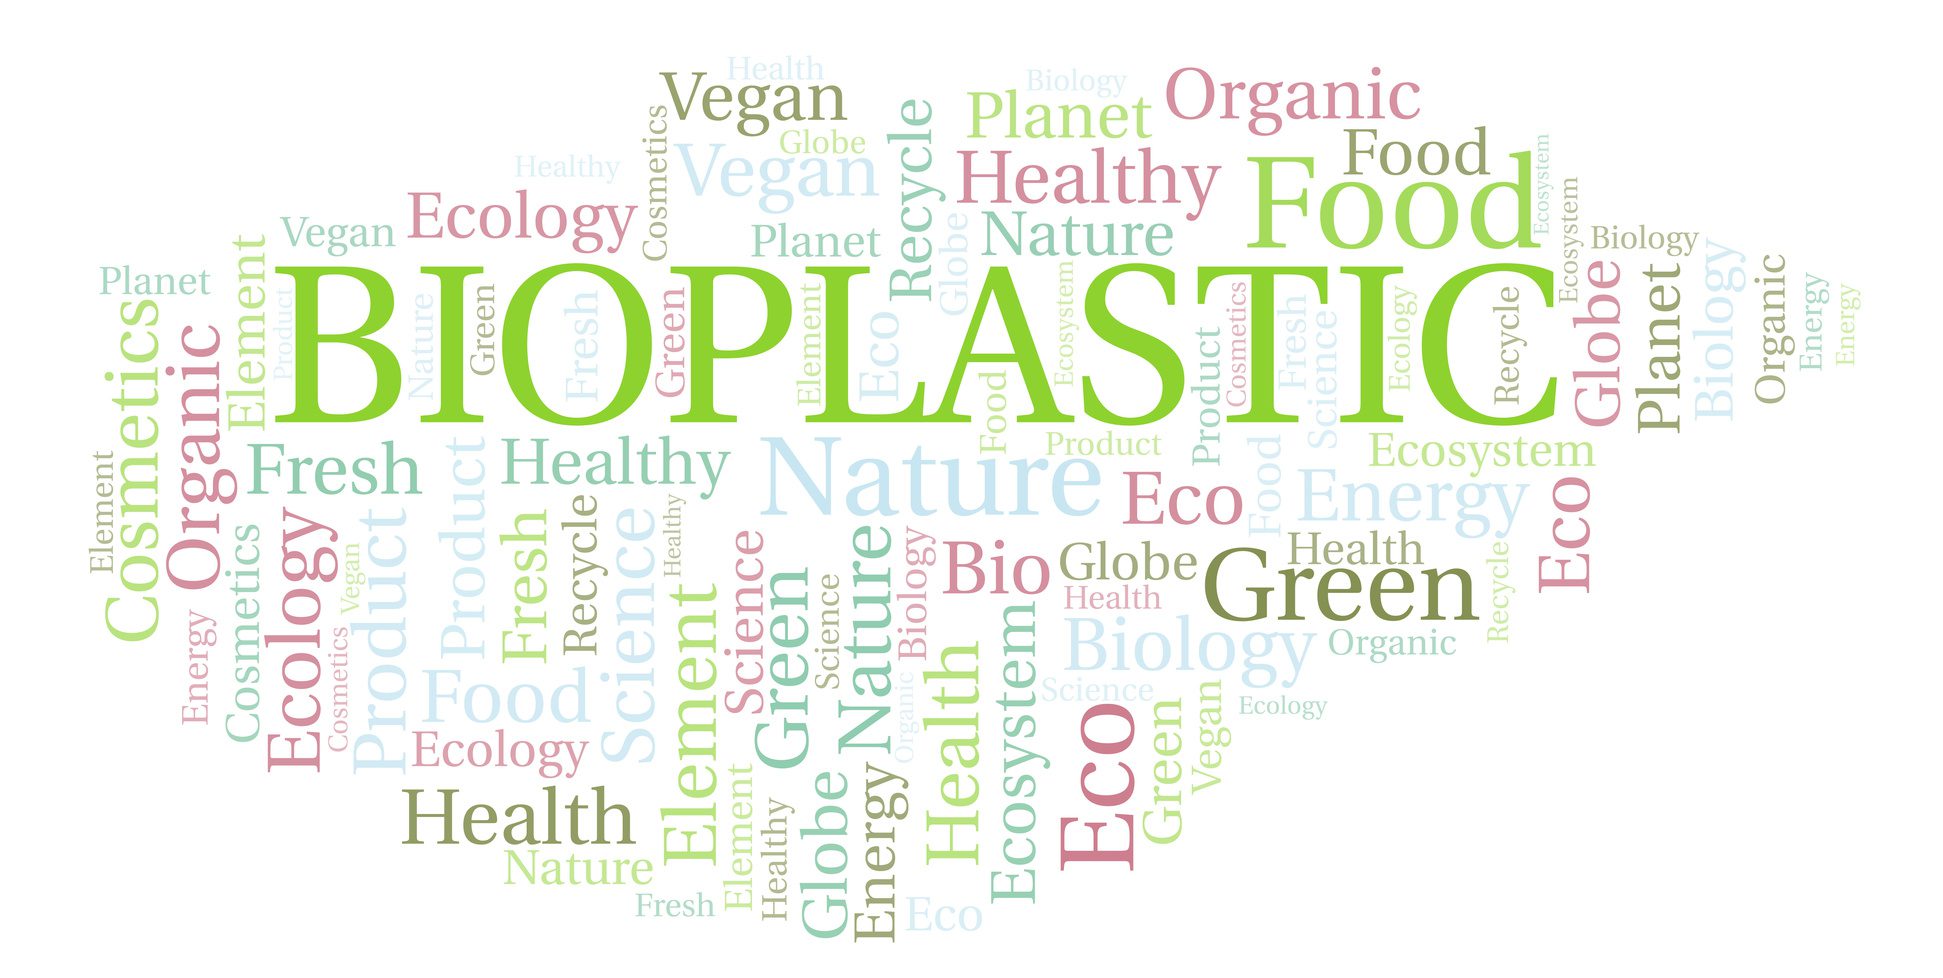 An Eco-Friendly Product Or Just A Mere Marketing Gimmick? Bio-plastics Are Gaining Momentum.